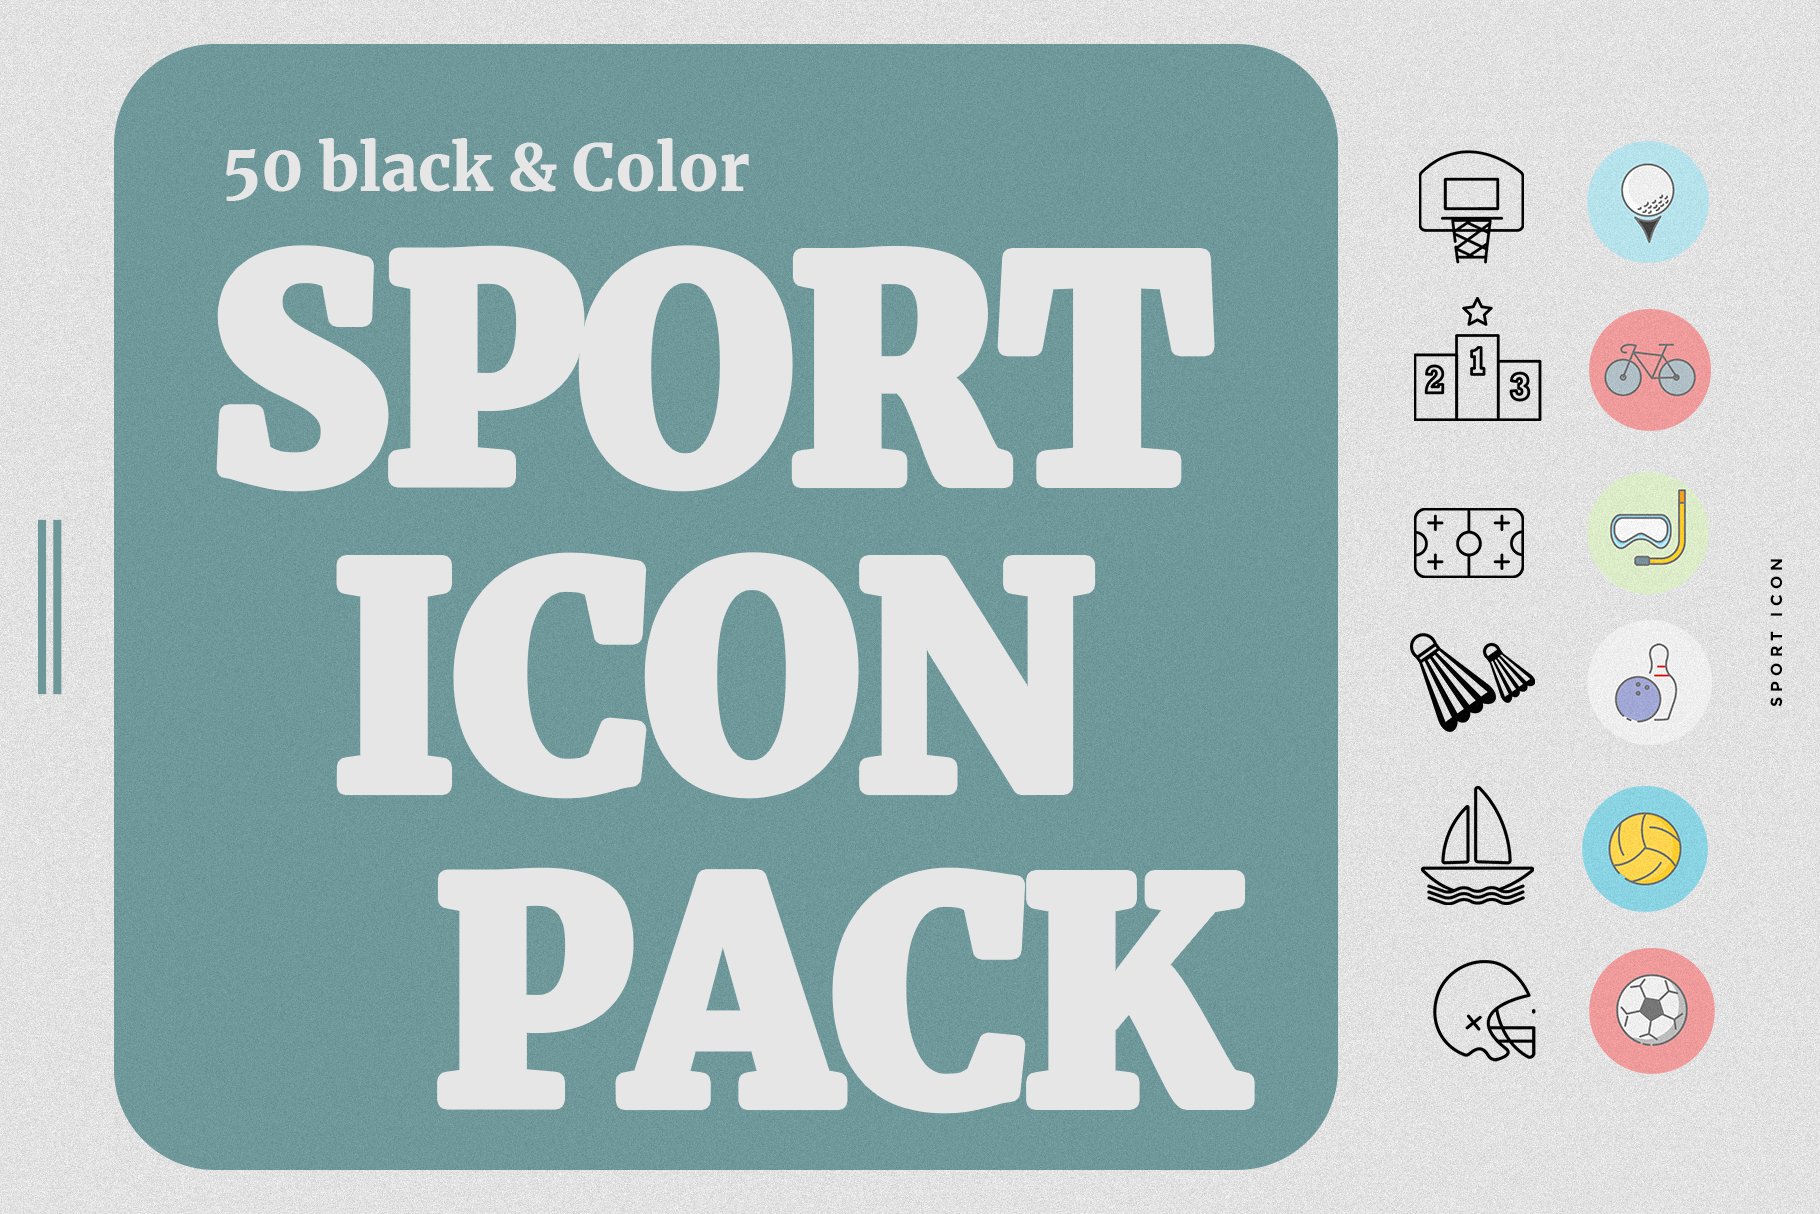 Sport Icon Pack cover image.